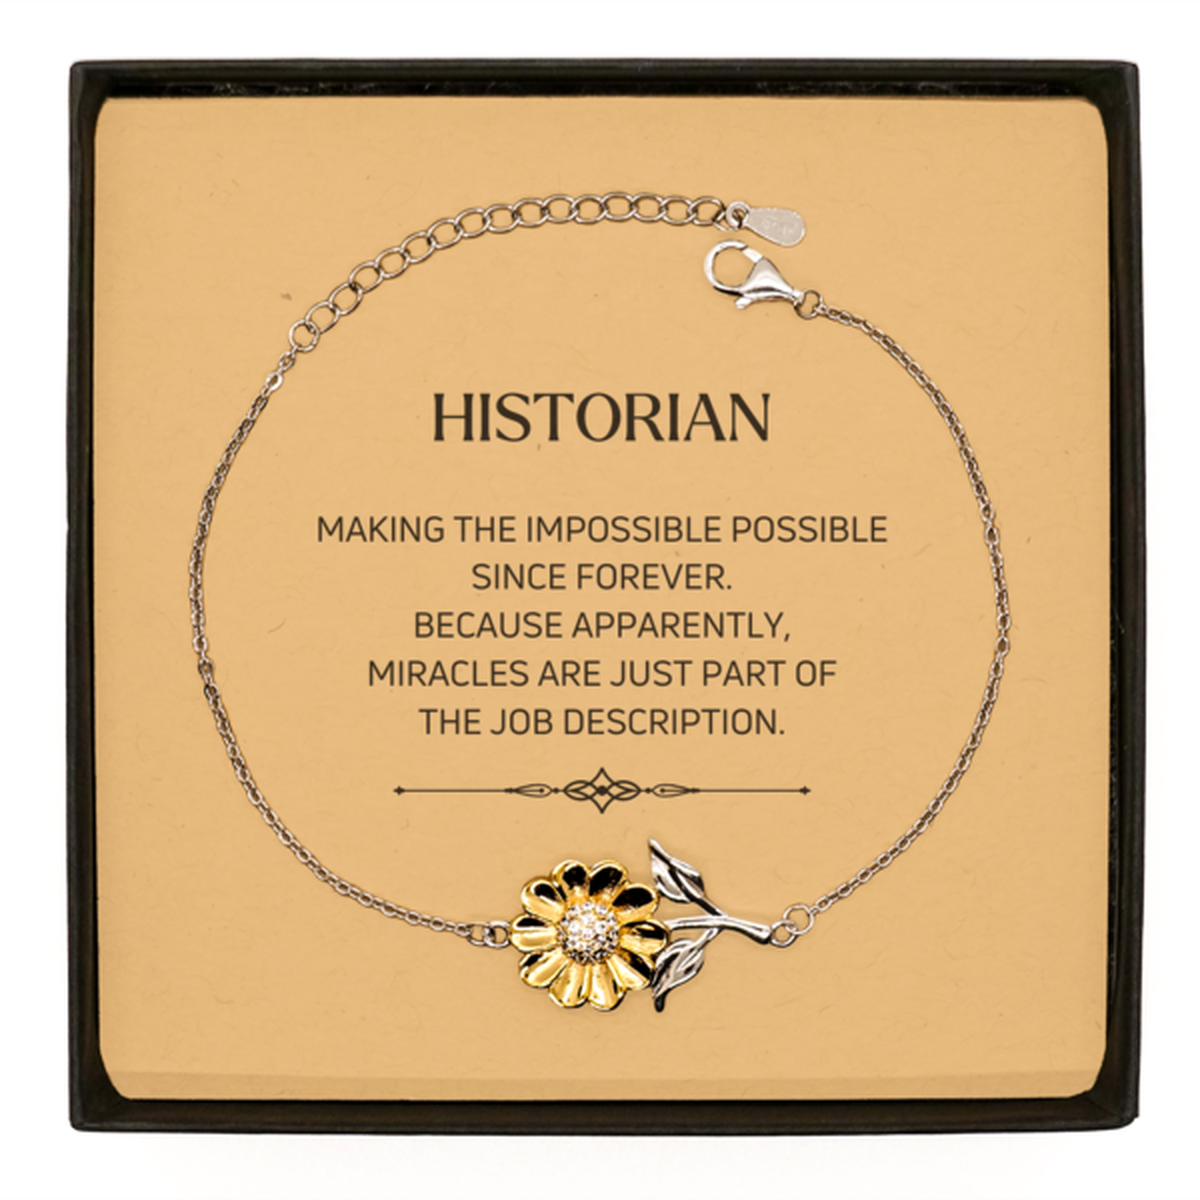 Funny Historian Gifts, Miracles are just part of the job description, Inspirational Birthday Sunflower Bracelet For Historian, Men, Women, Coworkers, Friends, Boss